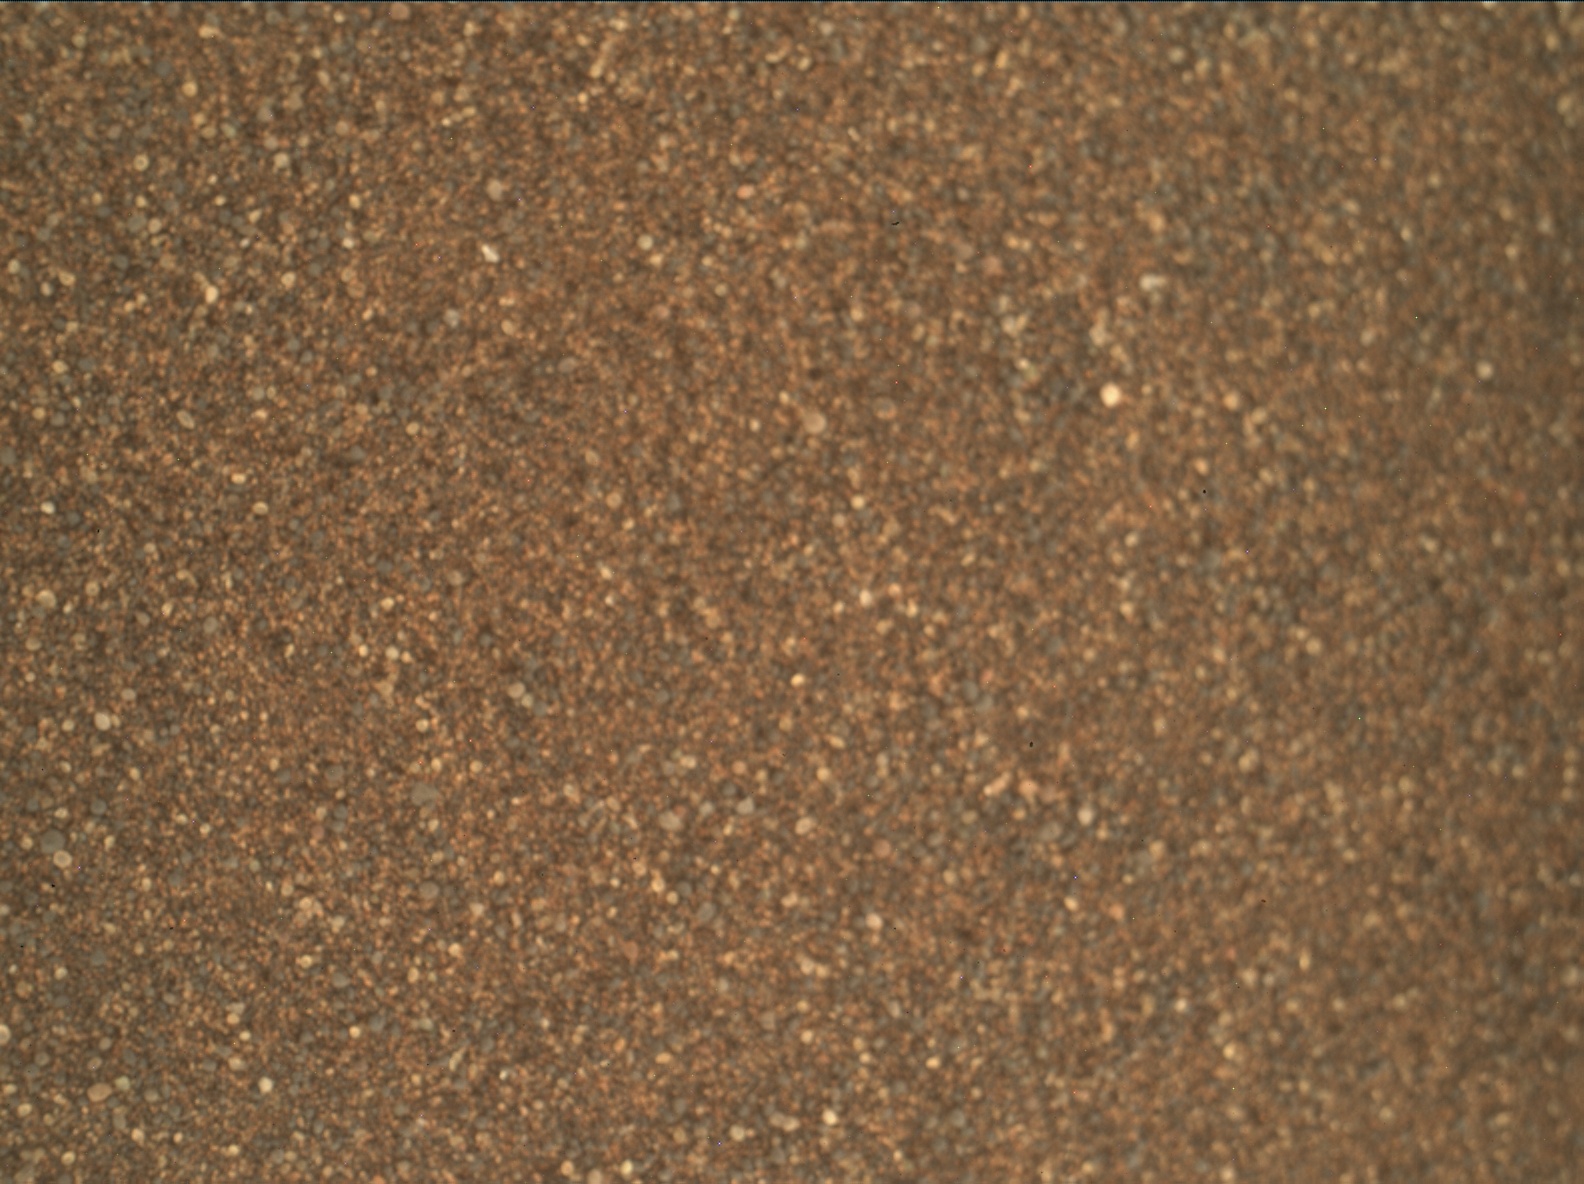 Nasa's Mars rover Curiosity acquired this image using its Mars Hand Lens Imager (MAHLI) on Sol 2993